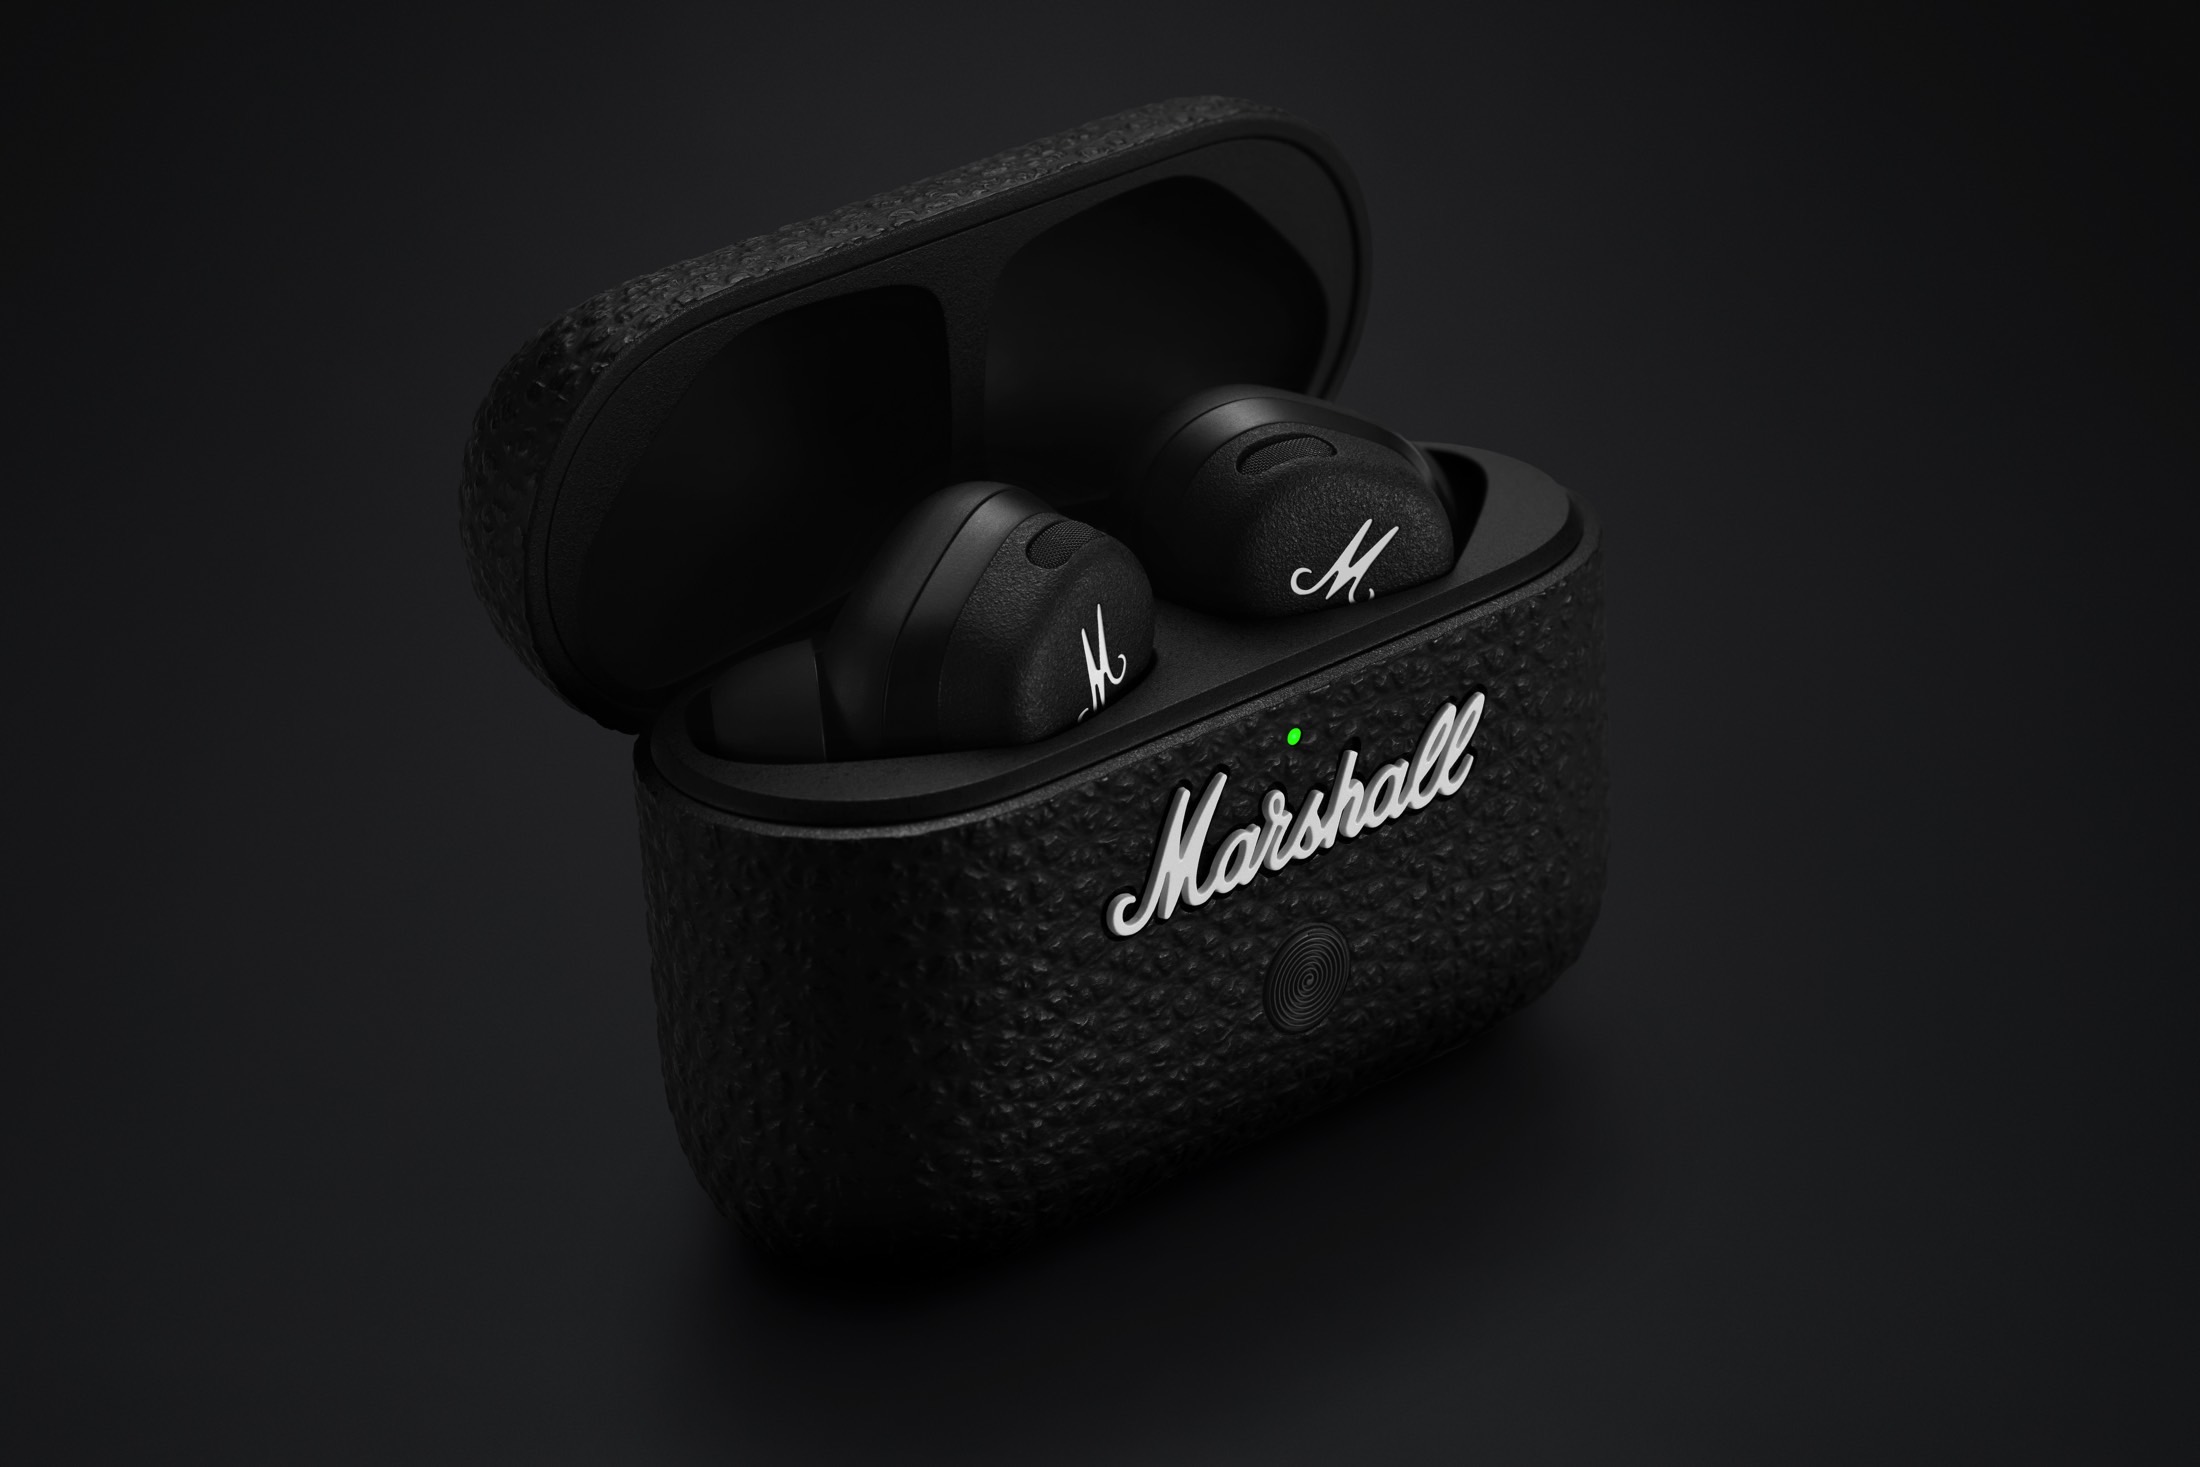 Marshall's updated Motif II ANC earbuds get better battery life